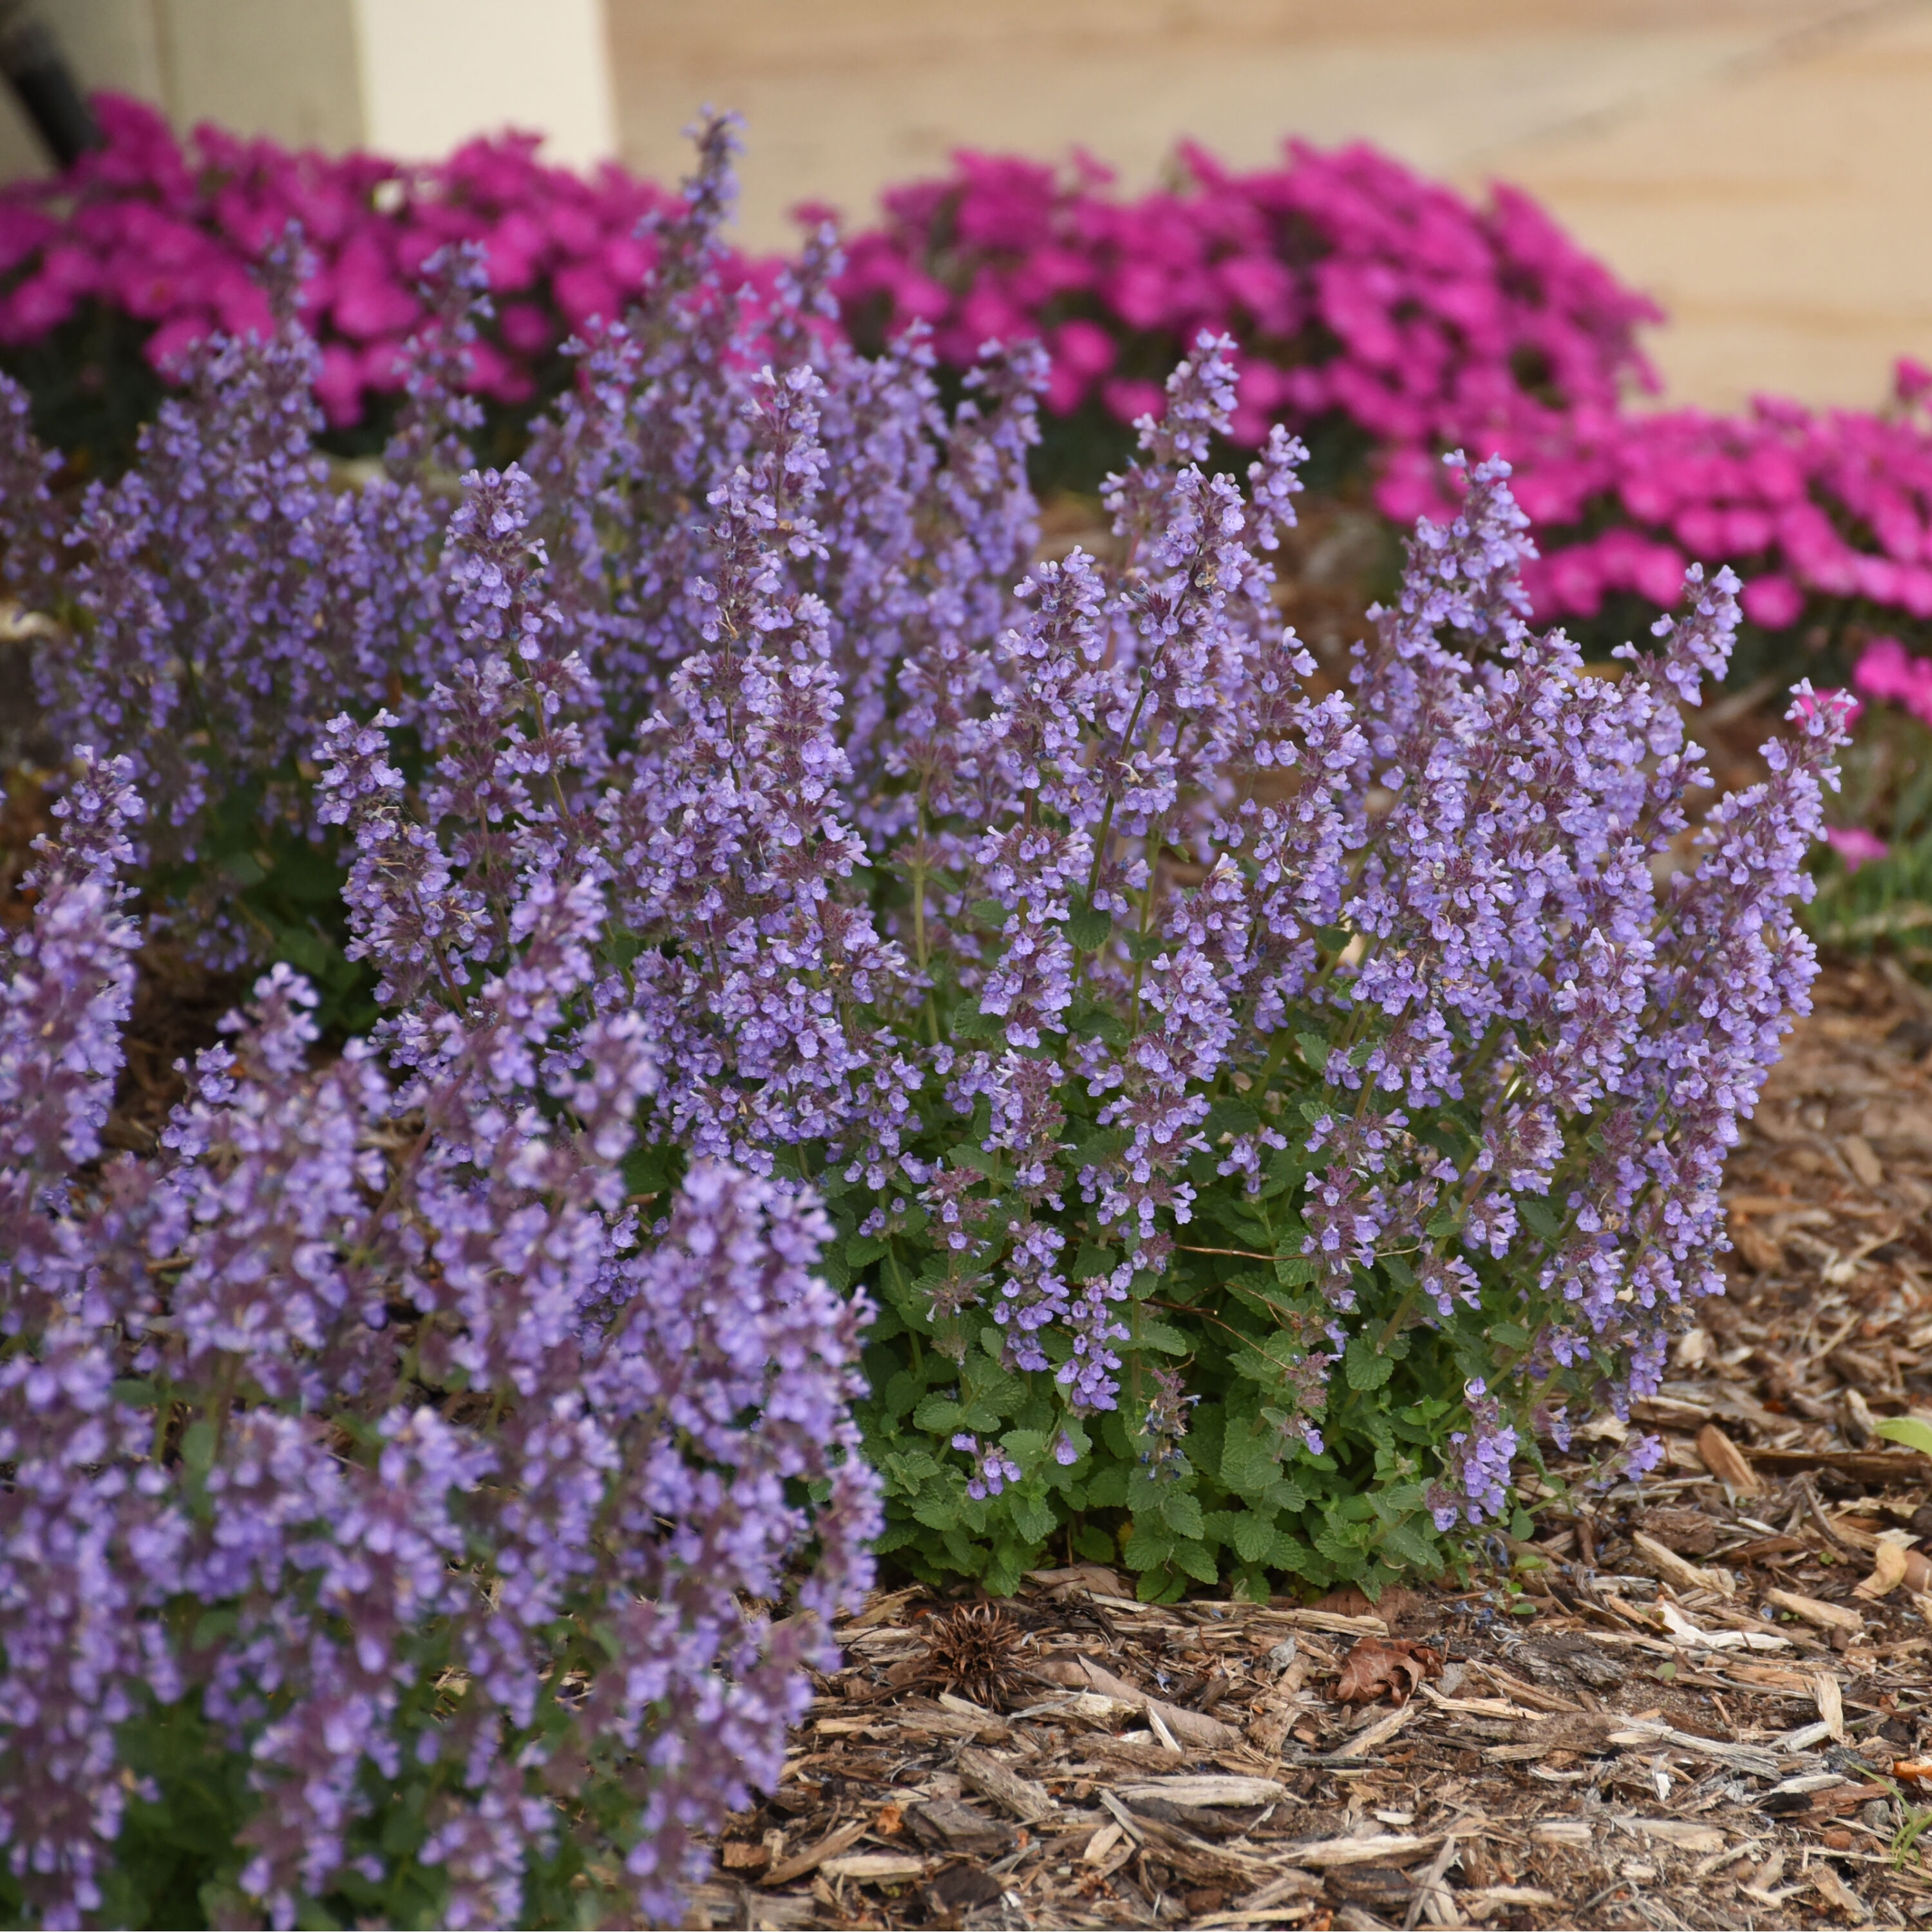 Proven Winners 'Cat's Pajamas' Catmint (Nepeta) - Indigo Blue Blooms,  Fragrant Perennial Plant - 0.65 Gallon Pot - Deer-Resistant - Attracts  Butterflies and Hummingbirds at